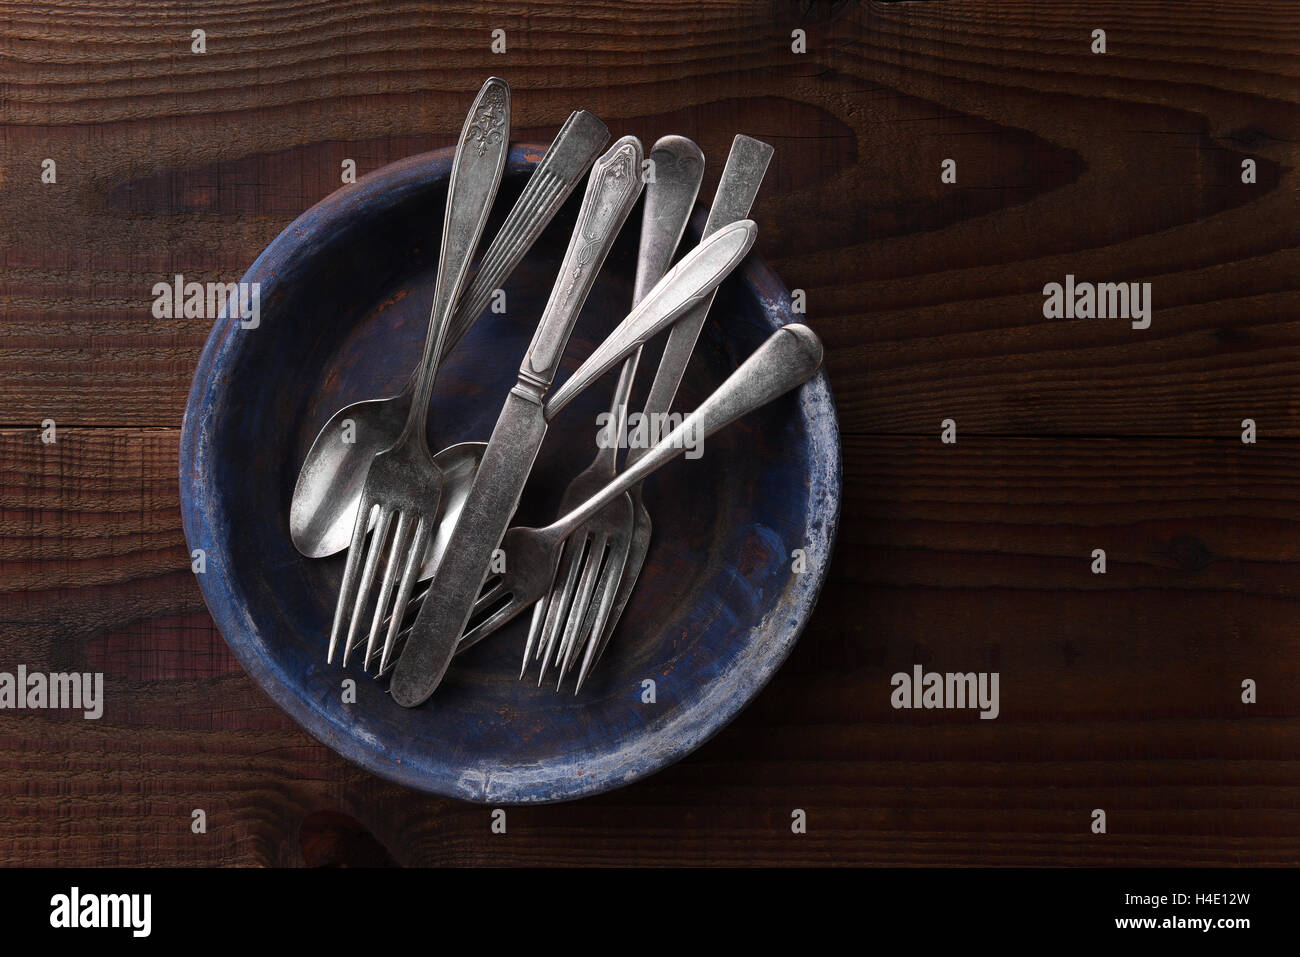 Top view of antique silverware on a plate on dark wood kitchen table. Stock Photo